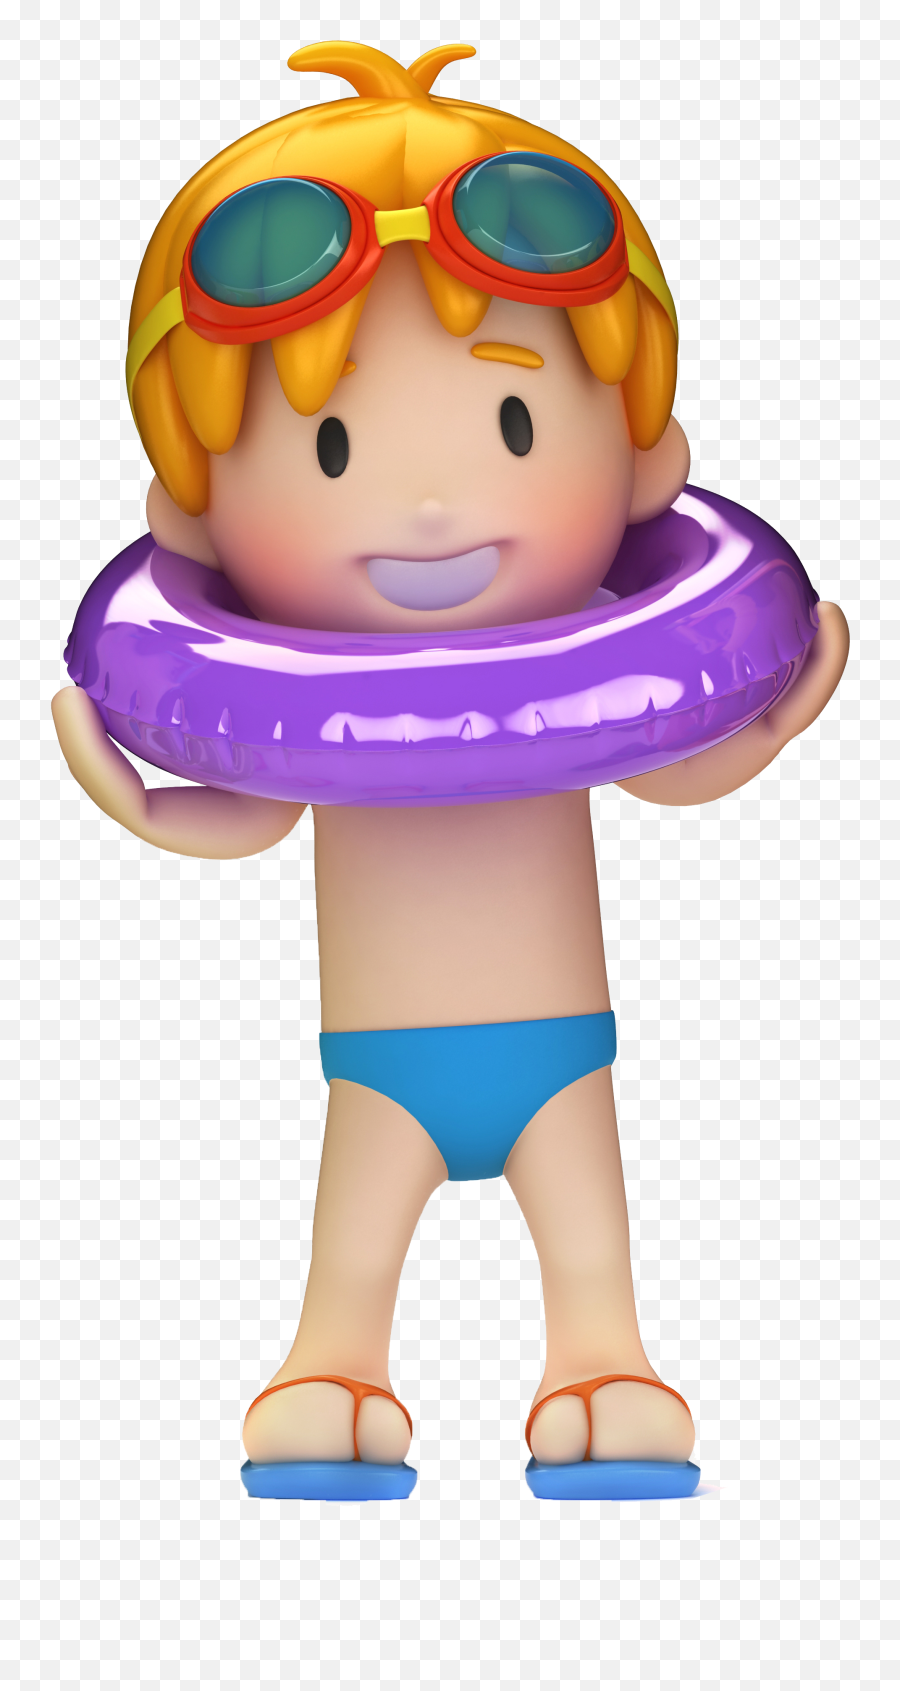 Clipart Child Swimming Pool Clipart Child Swimming Pool - Swimming Pool Children Cartoon Emoji,Swimming Pool Clipart